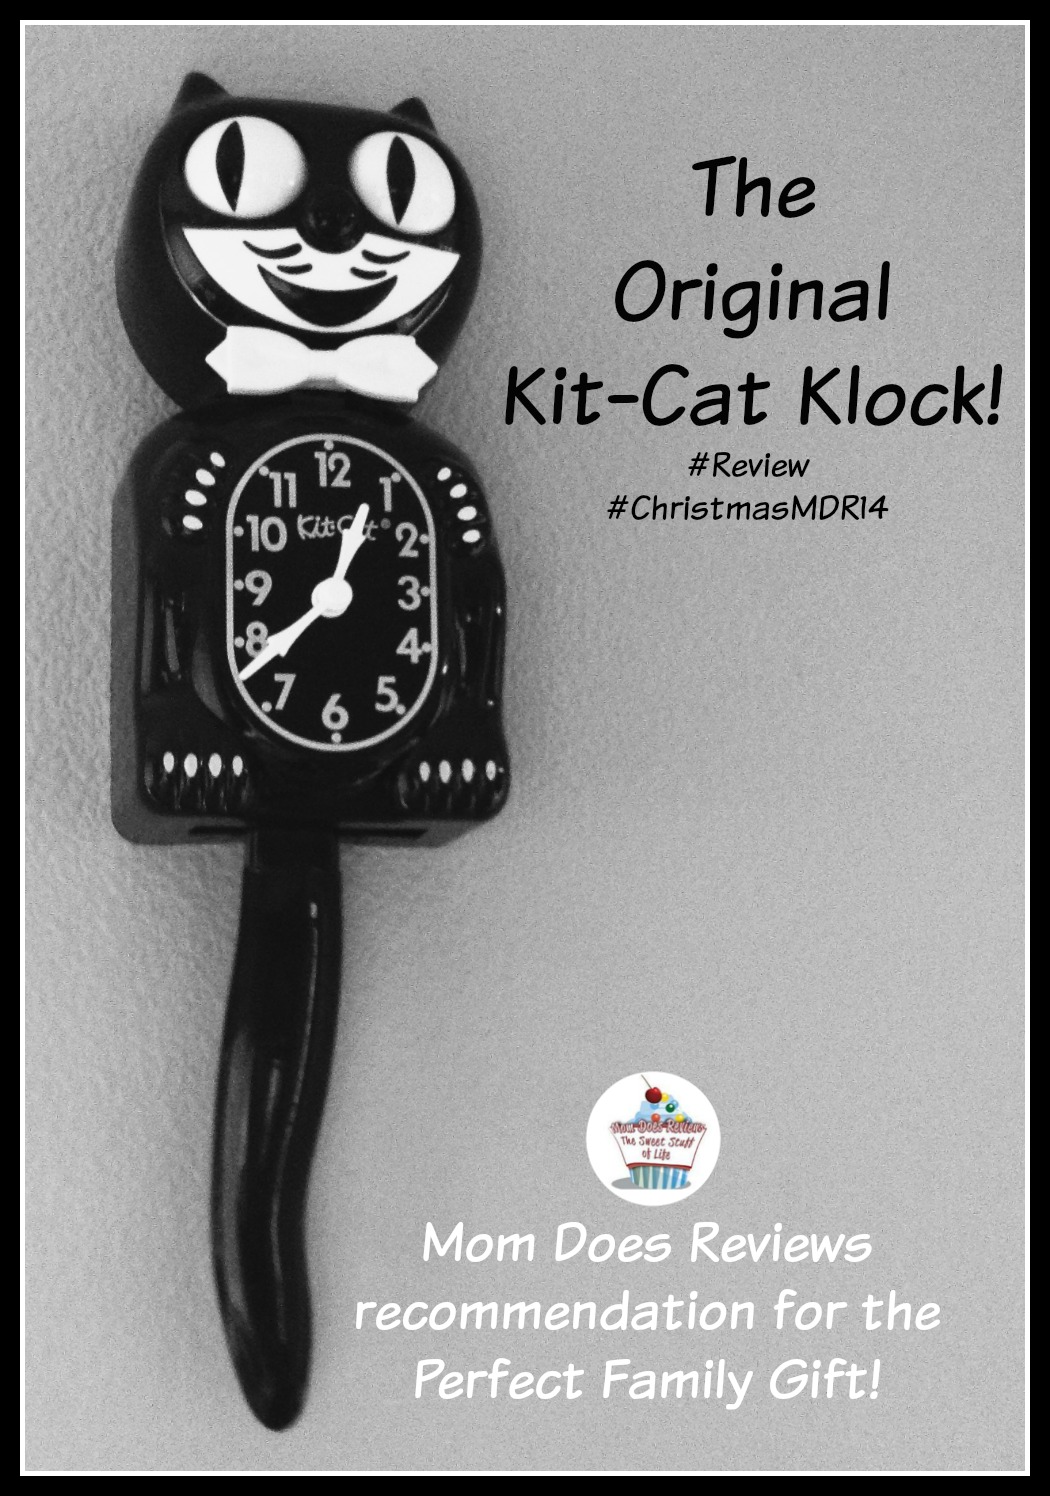 The Original Kit-Cat Klock Mom Does Reviews Holiday Gift Guide Review | Perfect gift for anyone of any age and especially families as a family gift | #MomDoesReviews#ChristmasMDR14